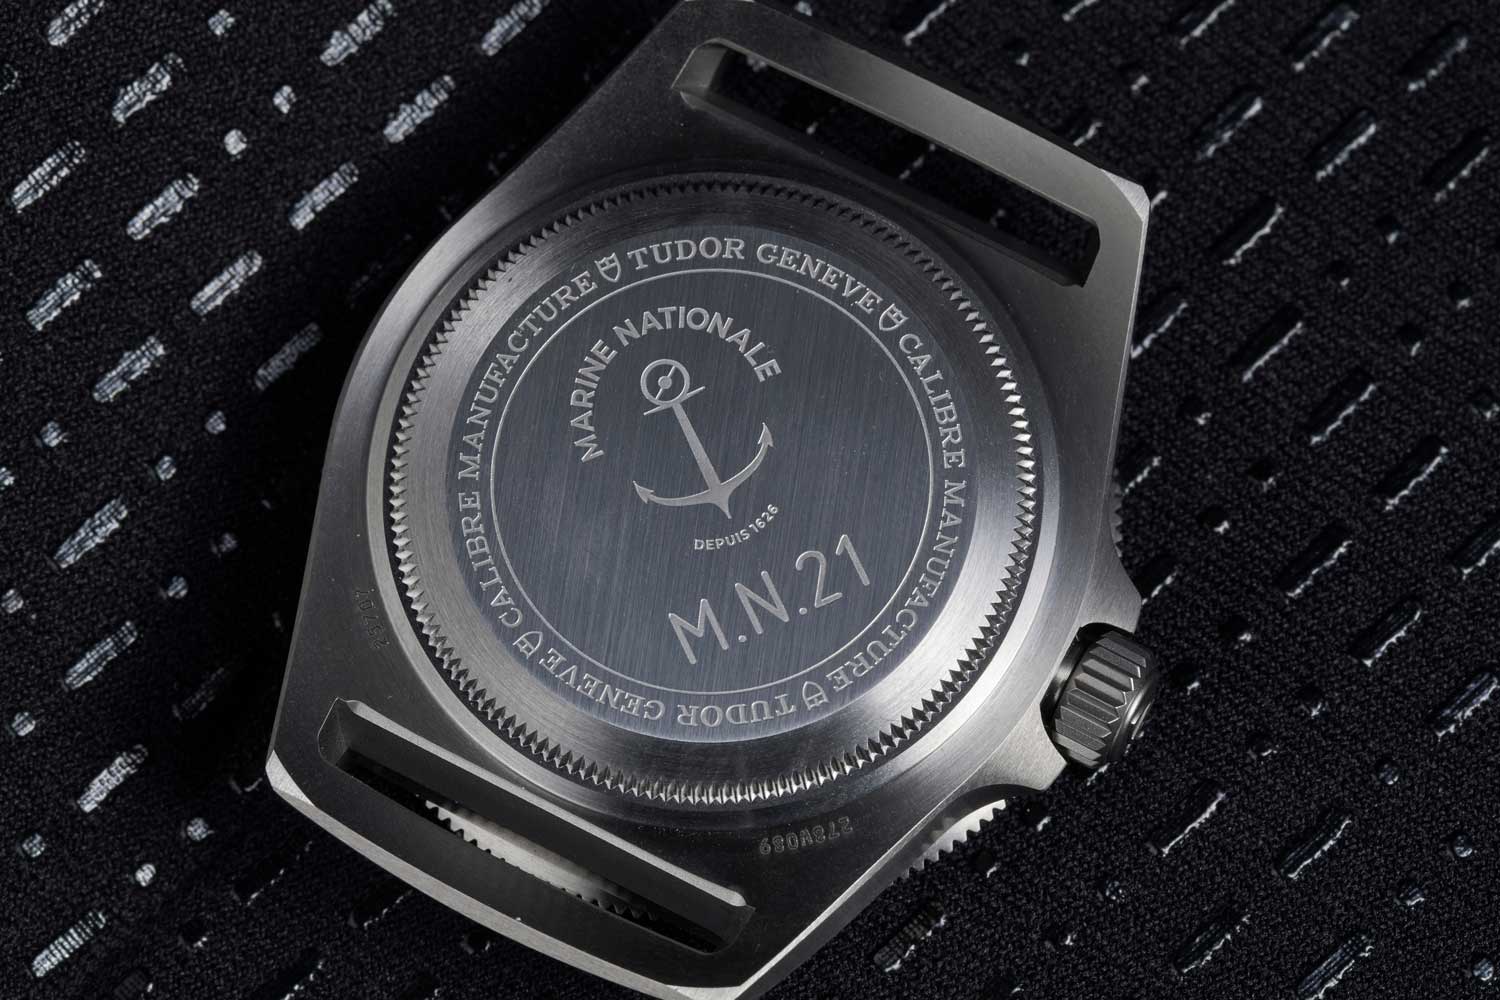 Engraved with "MN21" at the caseback (Image: Revolution©)